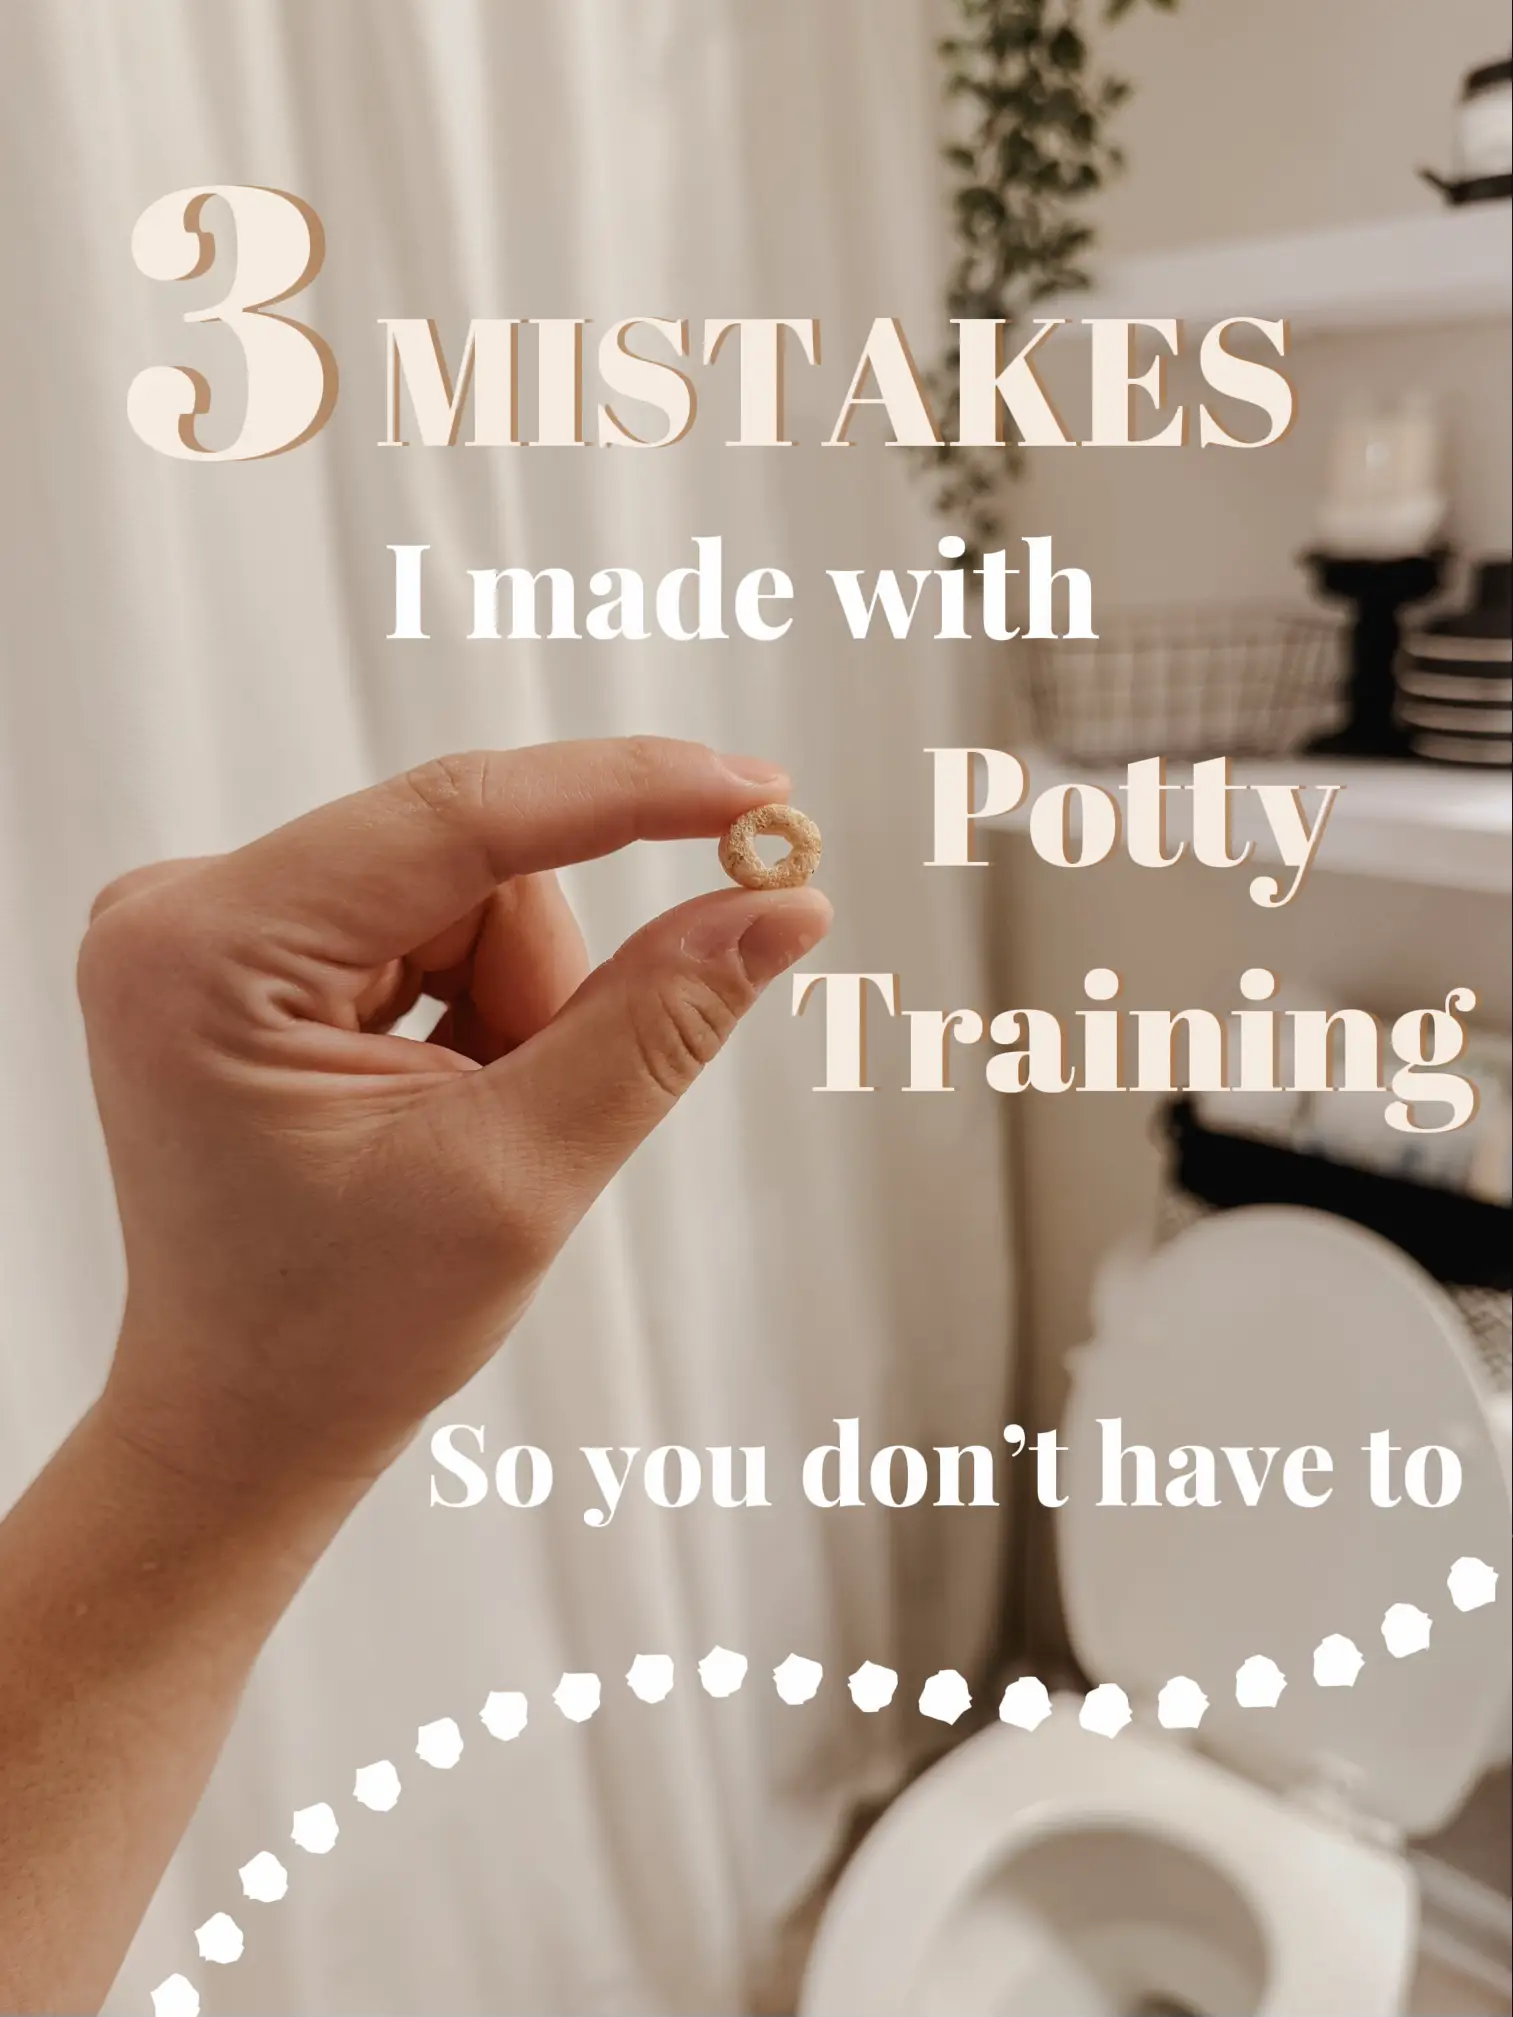 How to Successfully Potty Train Your Toddler - Lemon8 Search